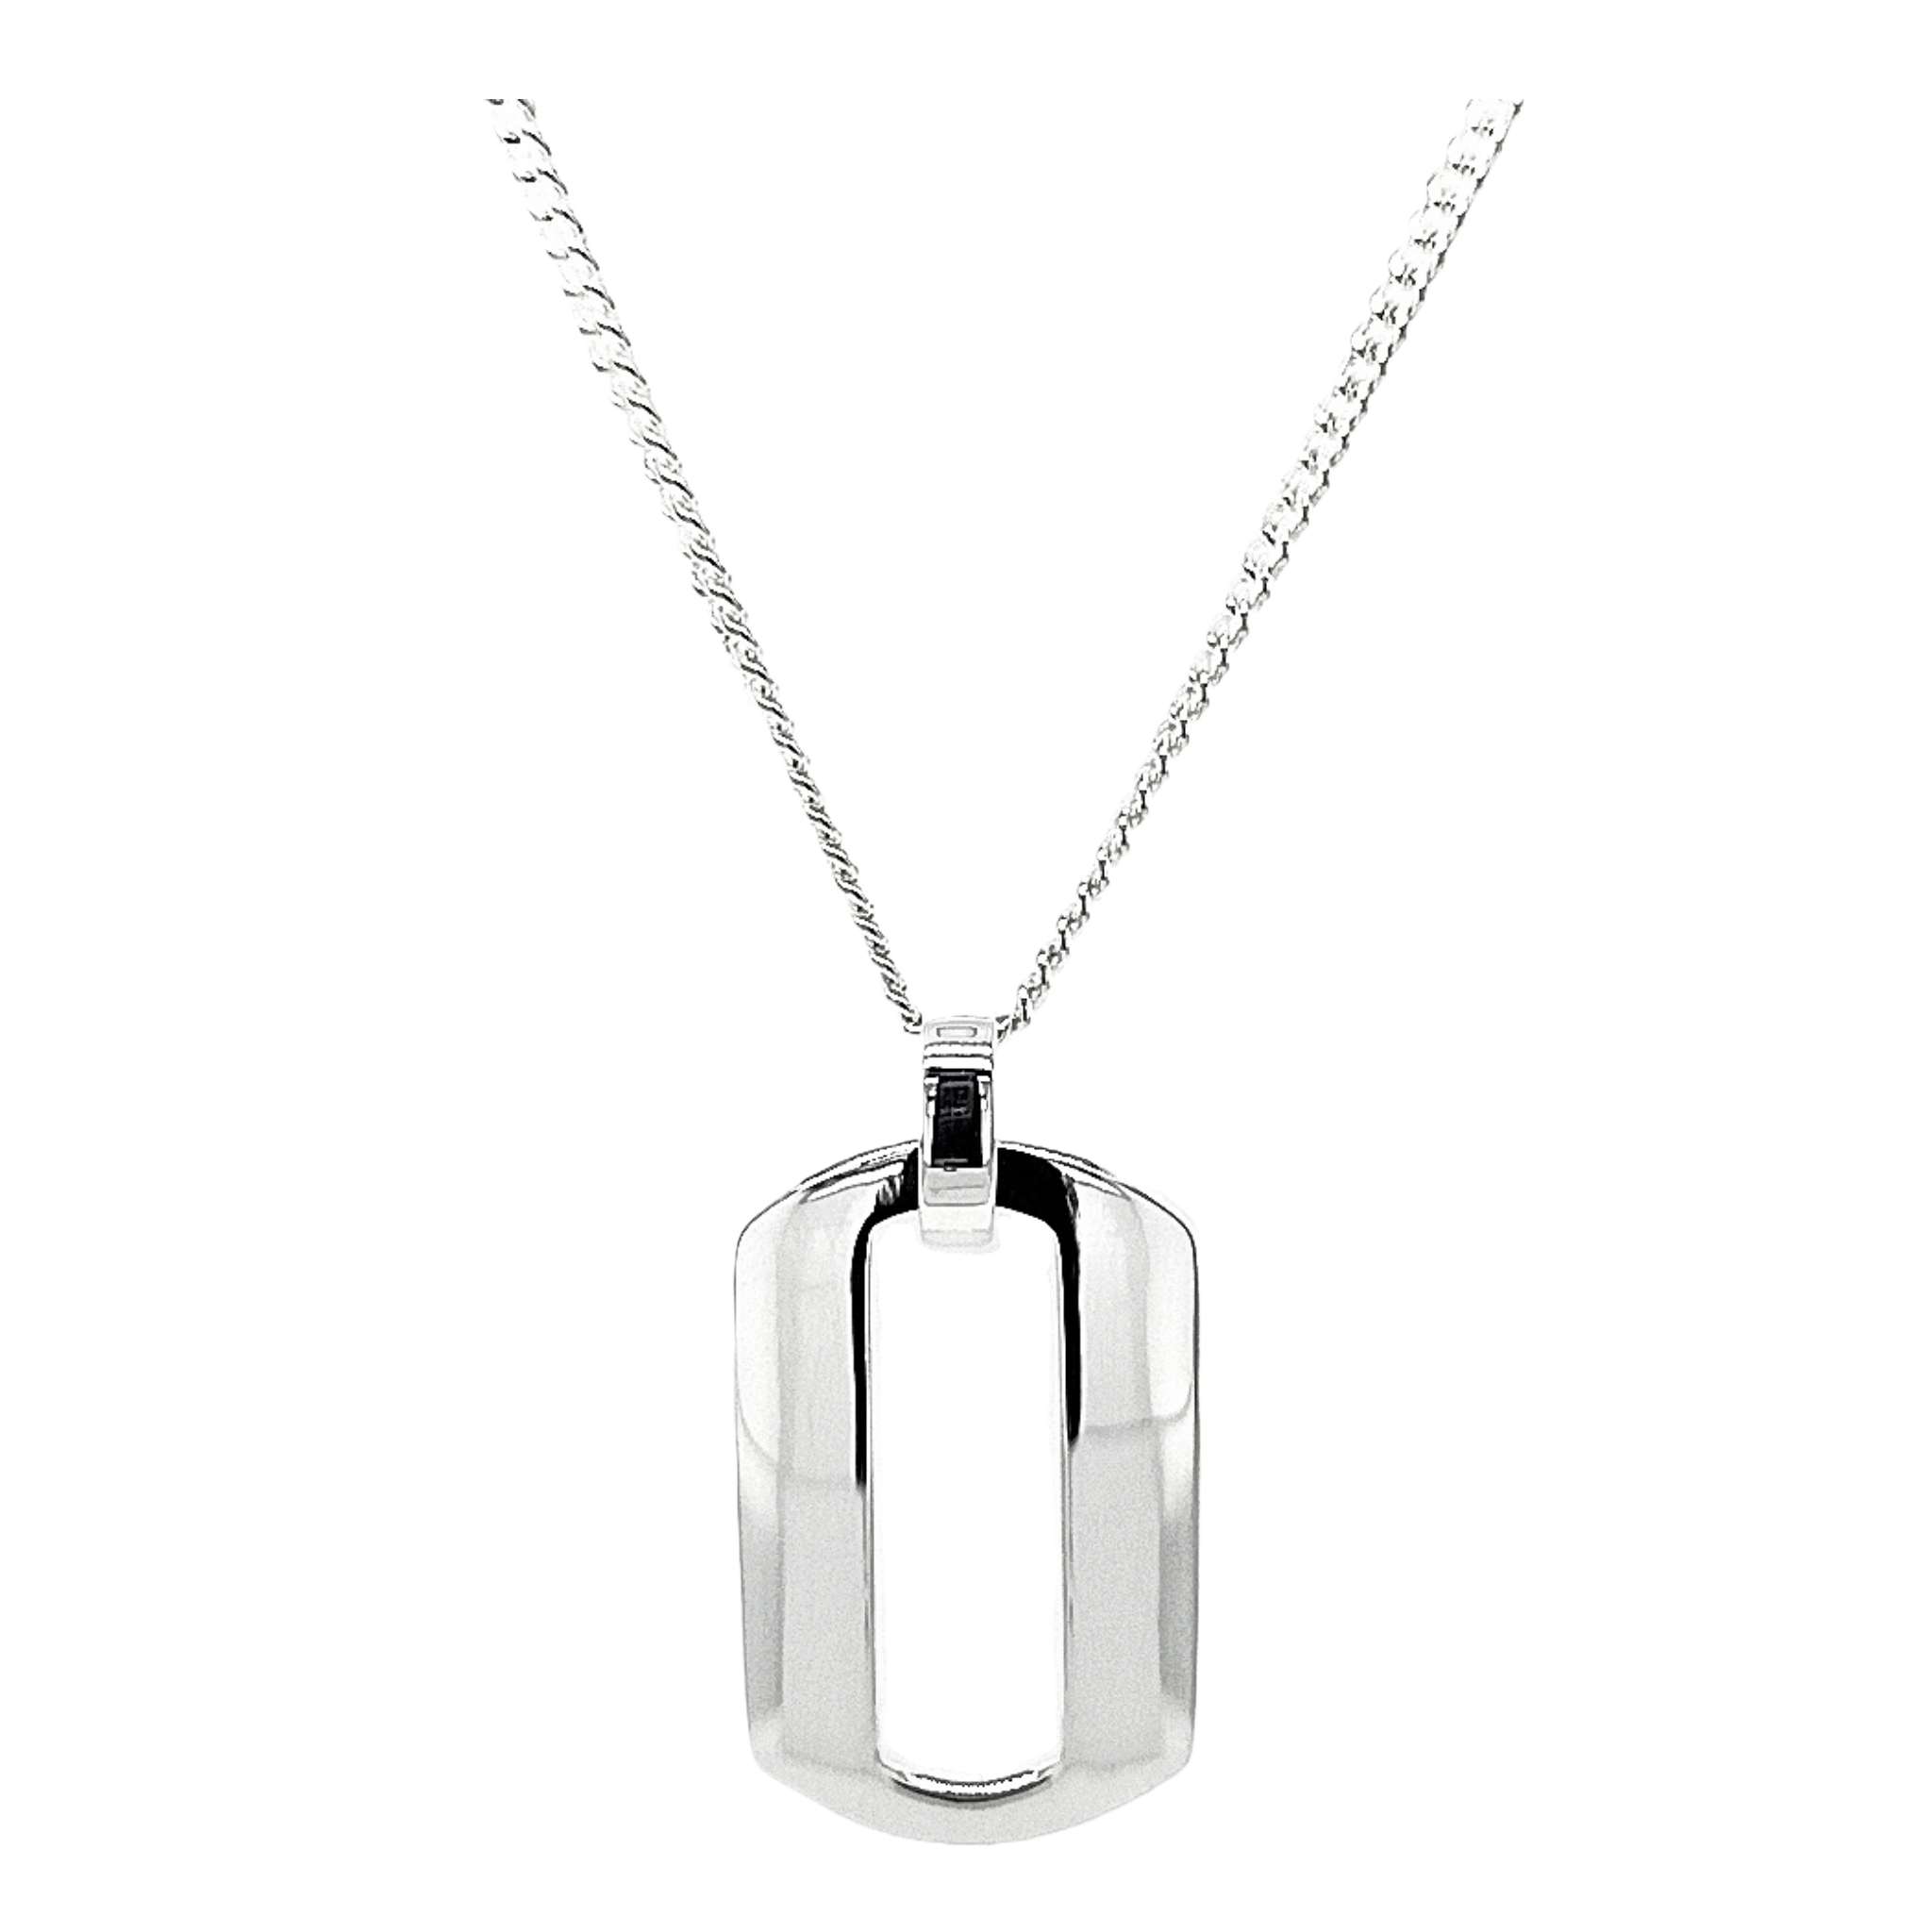 Silver Polished Open Rectangle ID Pendant on Chain